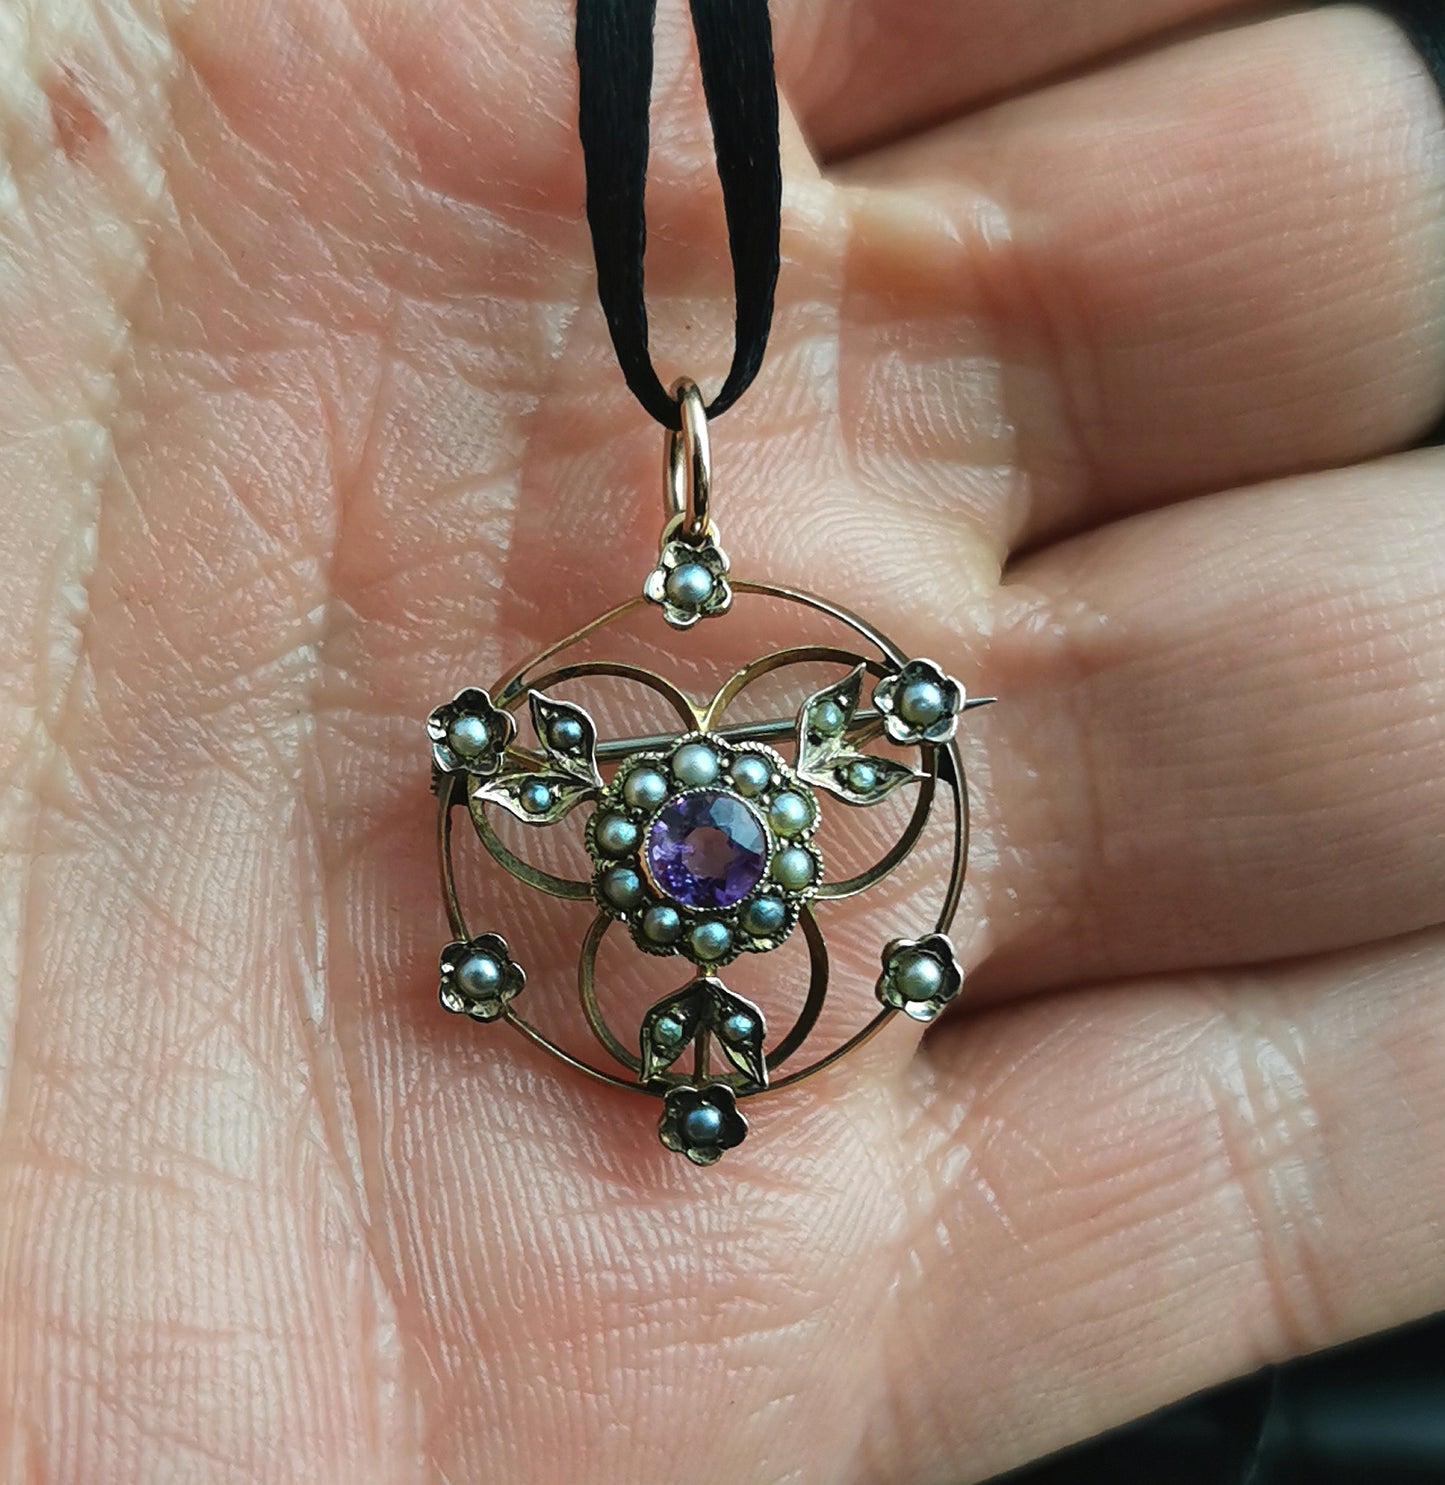 Antique Art Nouveau Amethyst and pearl pendant brooch, floral, 9ct gold